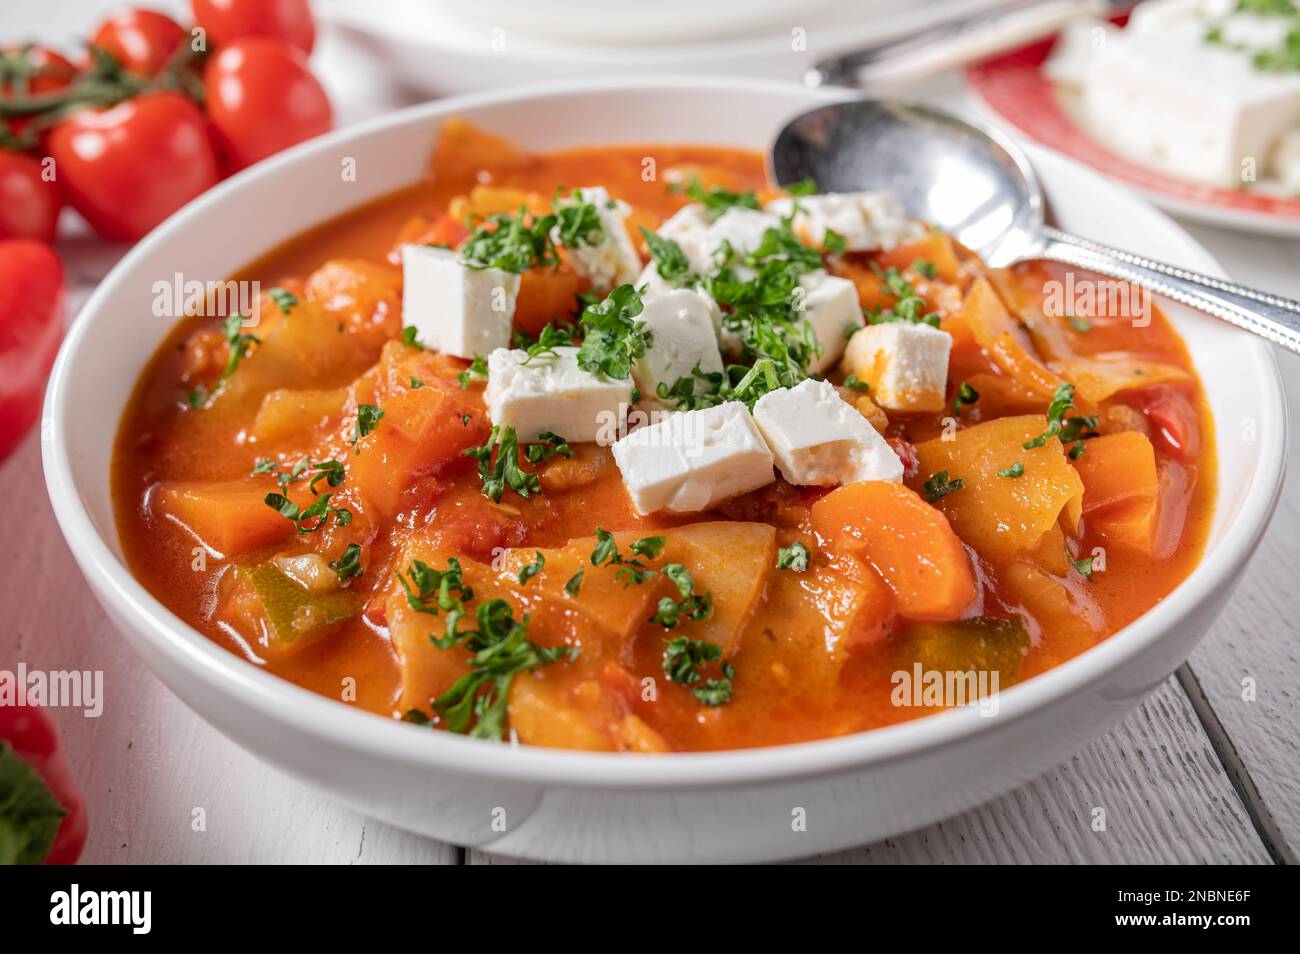 Vegetable soup with cabbage and feta cheese topping on a plate.Healthy detox meal Stock Photo